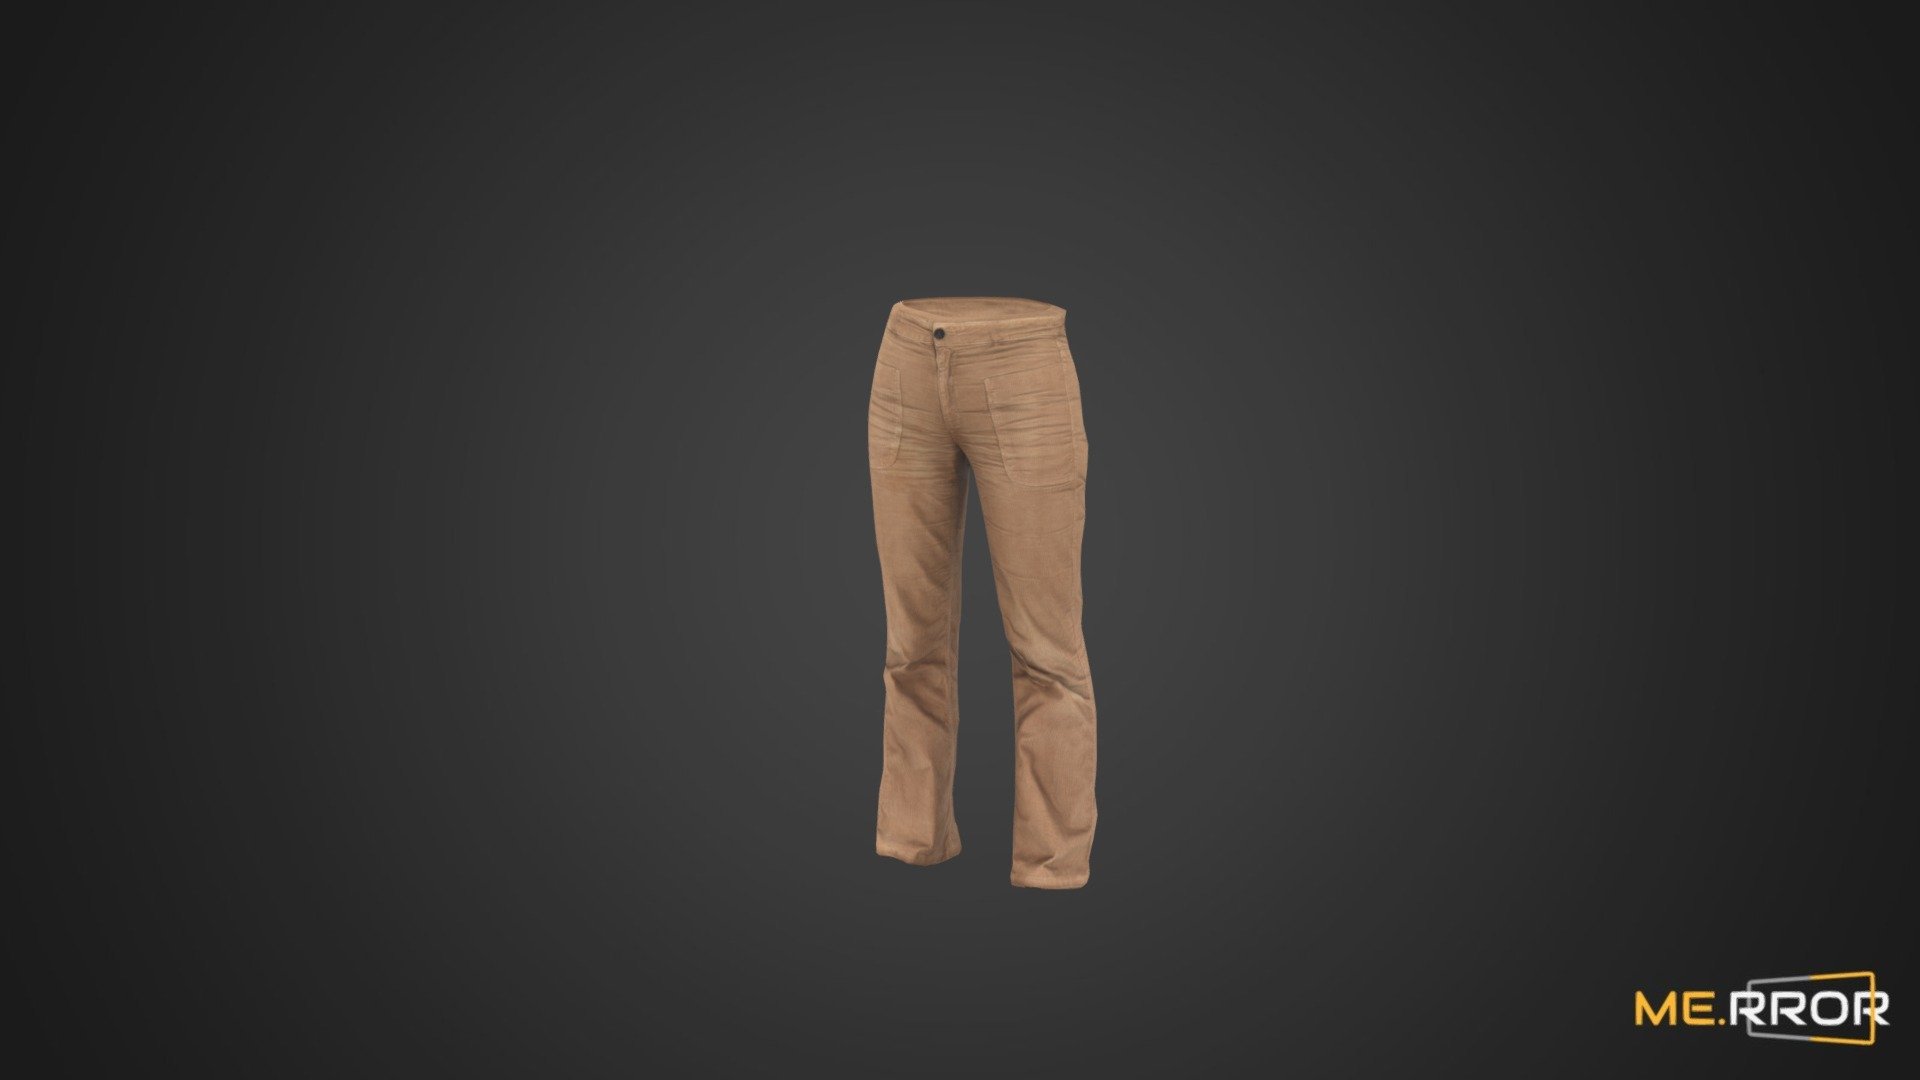 MERROR is a 3D Content PLATFORM which introduces various Asian assets to the 3D world


3DScanning #Photogrametry #ME.RROR - [Game-Ready] Ocher Pants - Buy Royalty Free 3D model by ME.RROR (@merror) 3d model